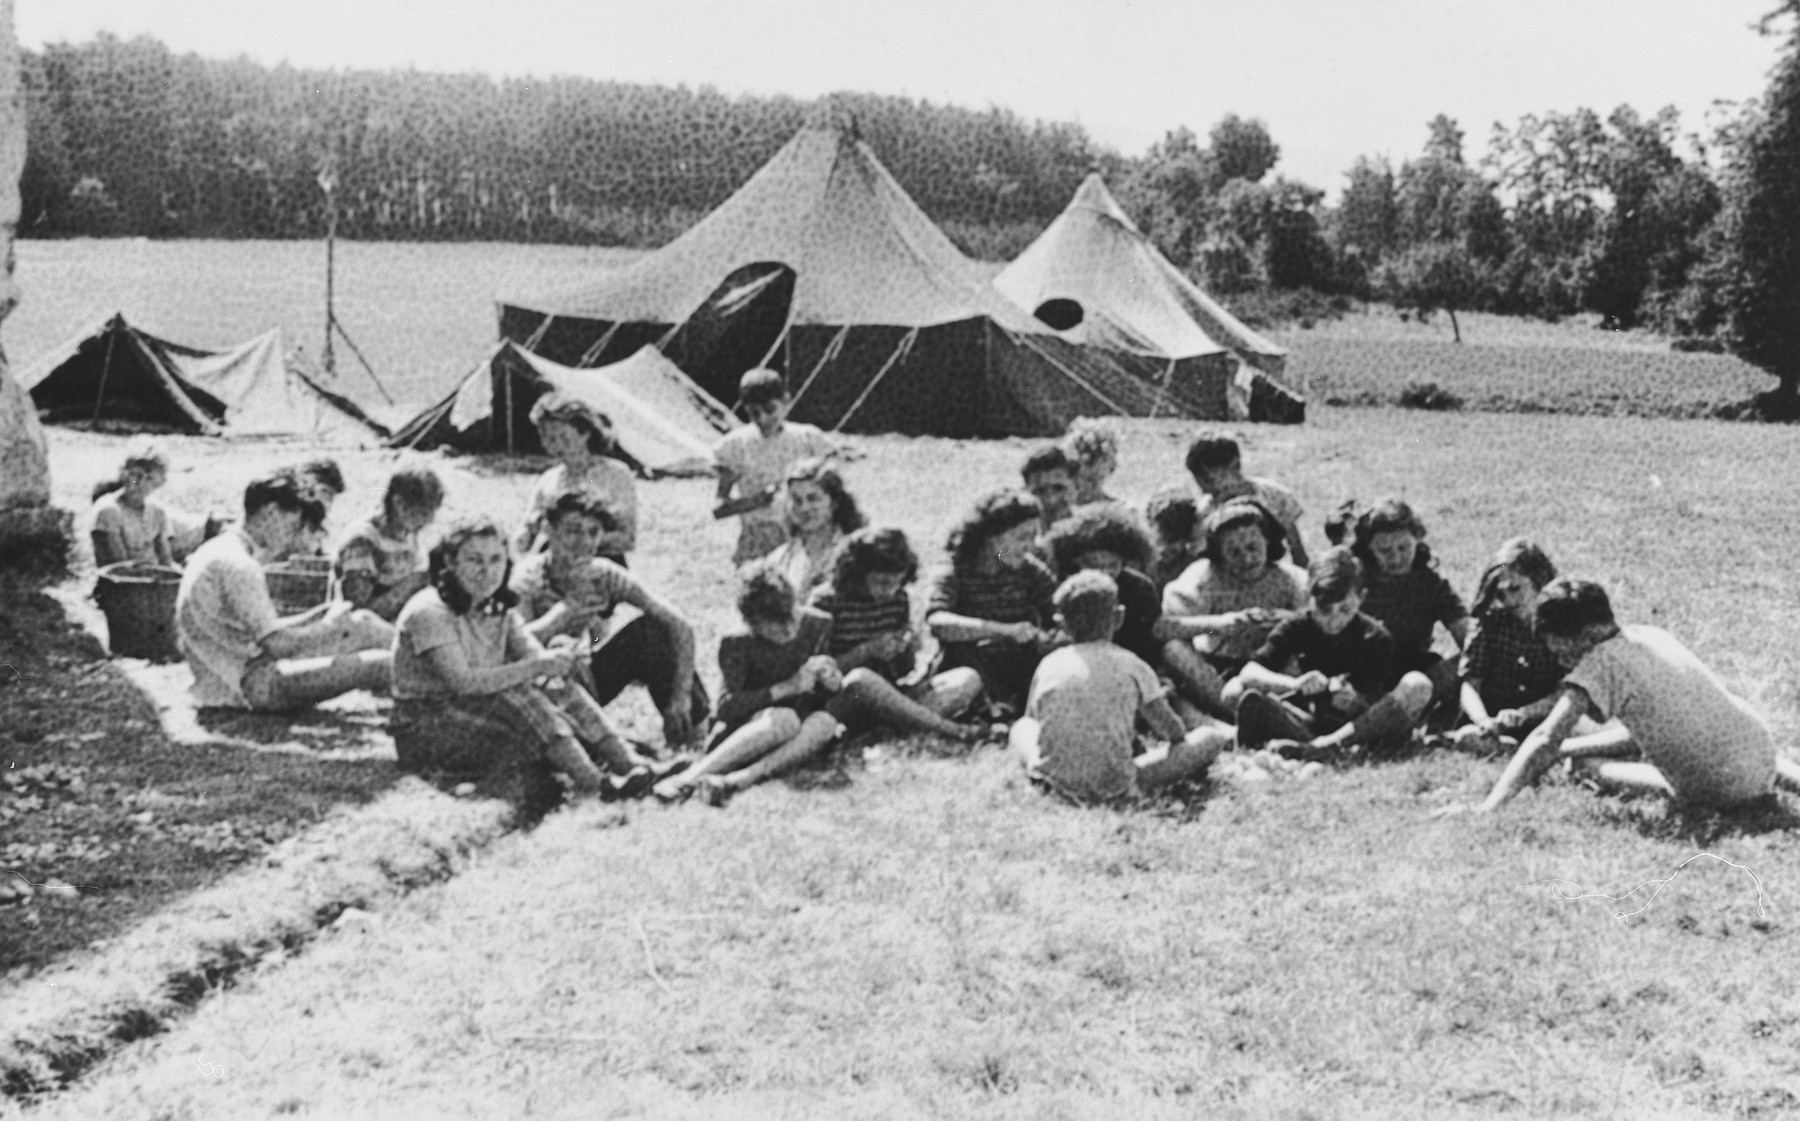 Jewish children go camping in Ambert on an excursion sponsored by the OSE.